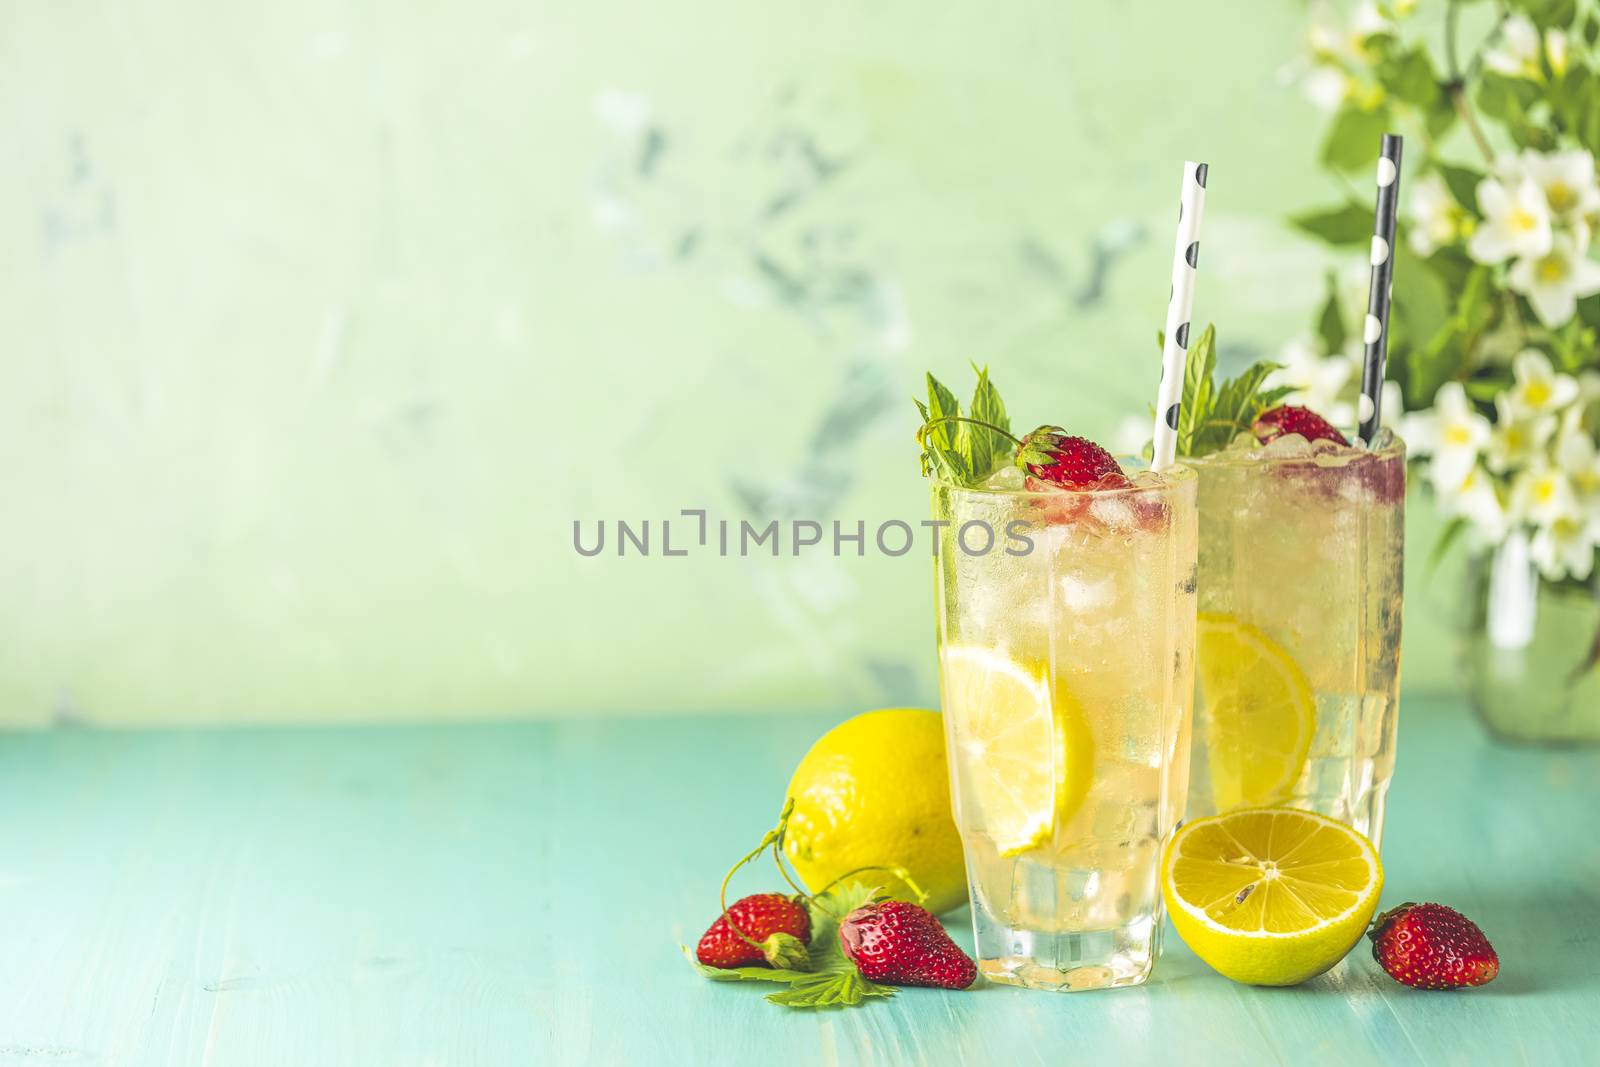 Two glasses of cold icy refreshing drink with lemon and strawberry served with bar tools on green wooden table with white blooming flowers. Fresh cocktail drinks with ice fruit and herb decoration.